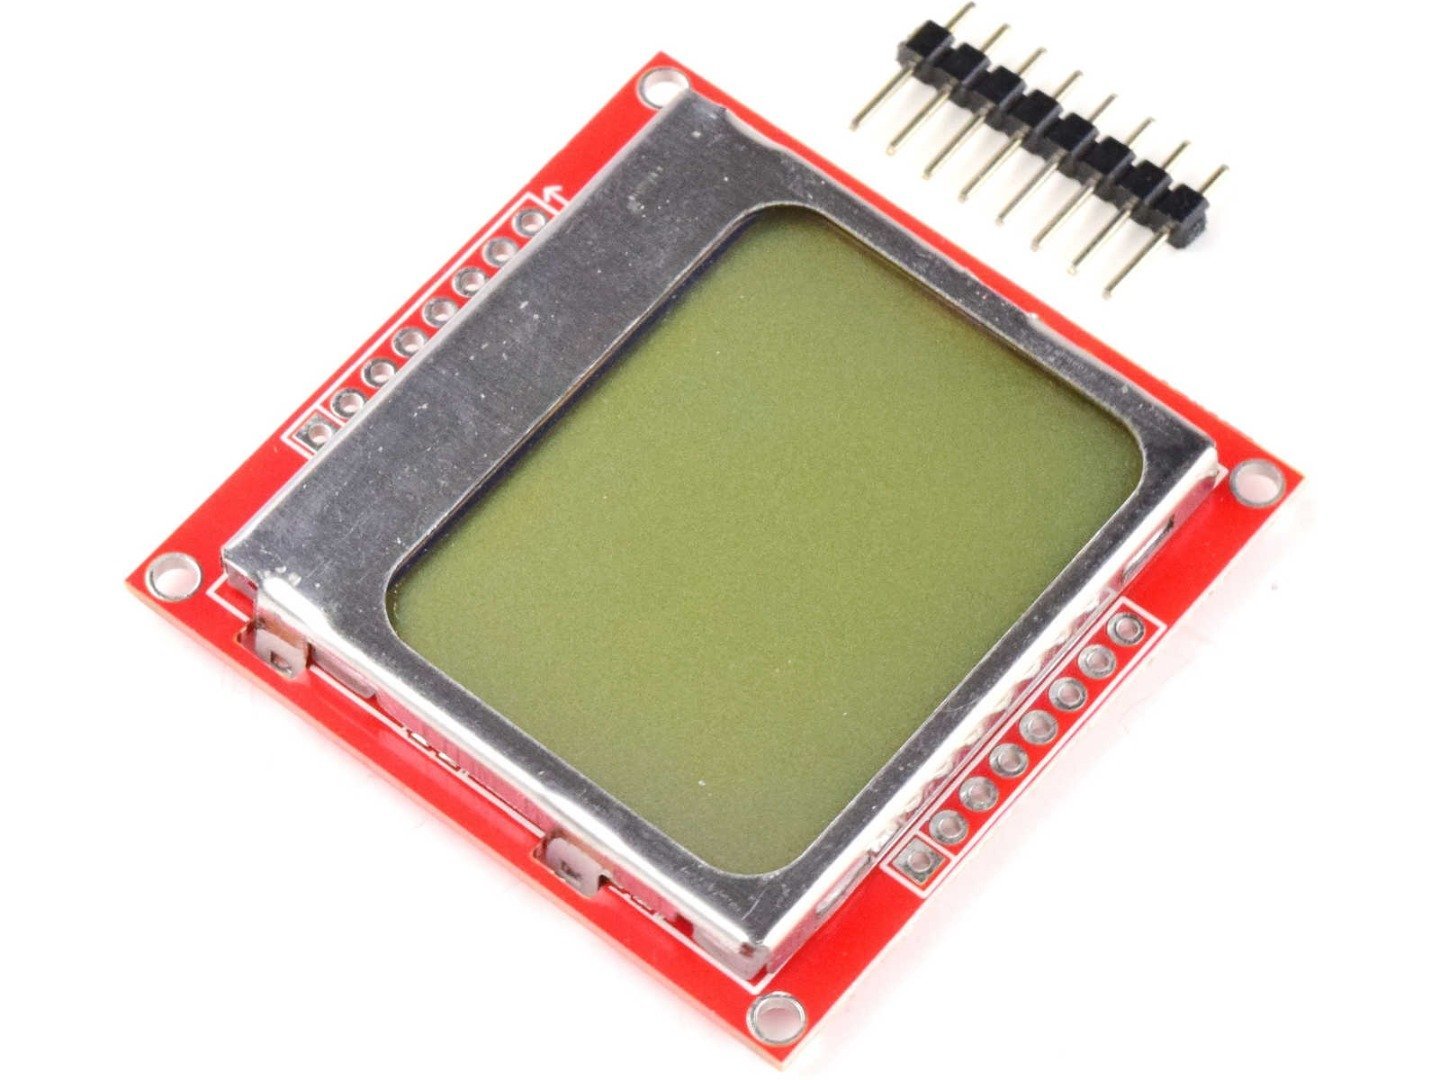 LCD Display 84×48 Pixel – SPI – Backlight – Nokia 5110 for Arduino etc. 5